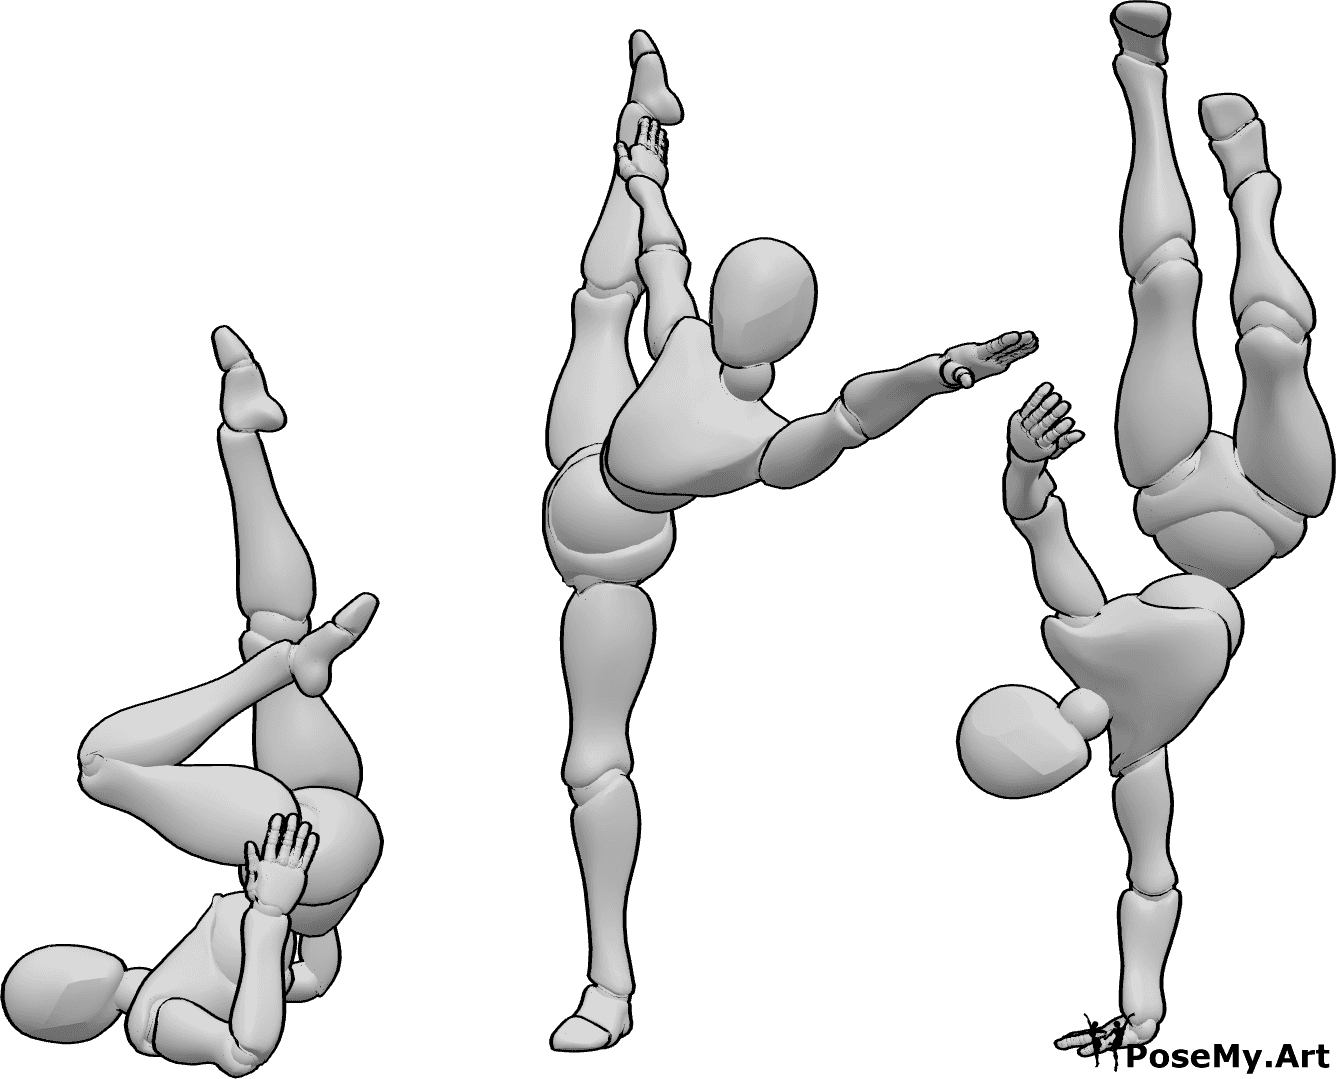 Pose Reference- Acrobatic dance pose - Three females are acrobatic dancing and posing